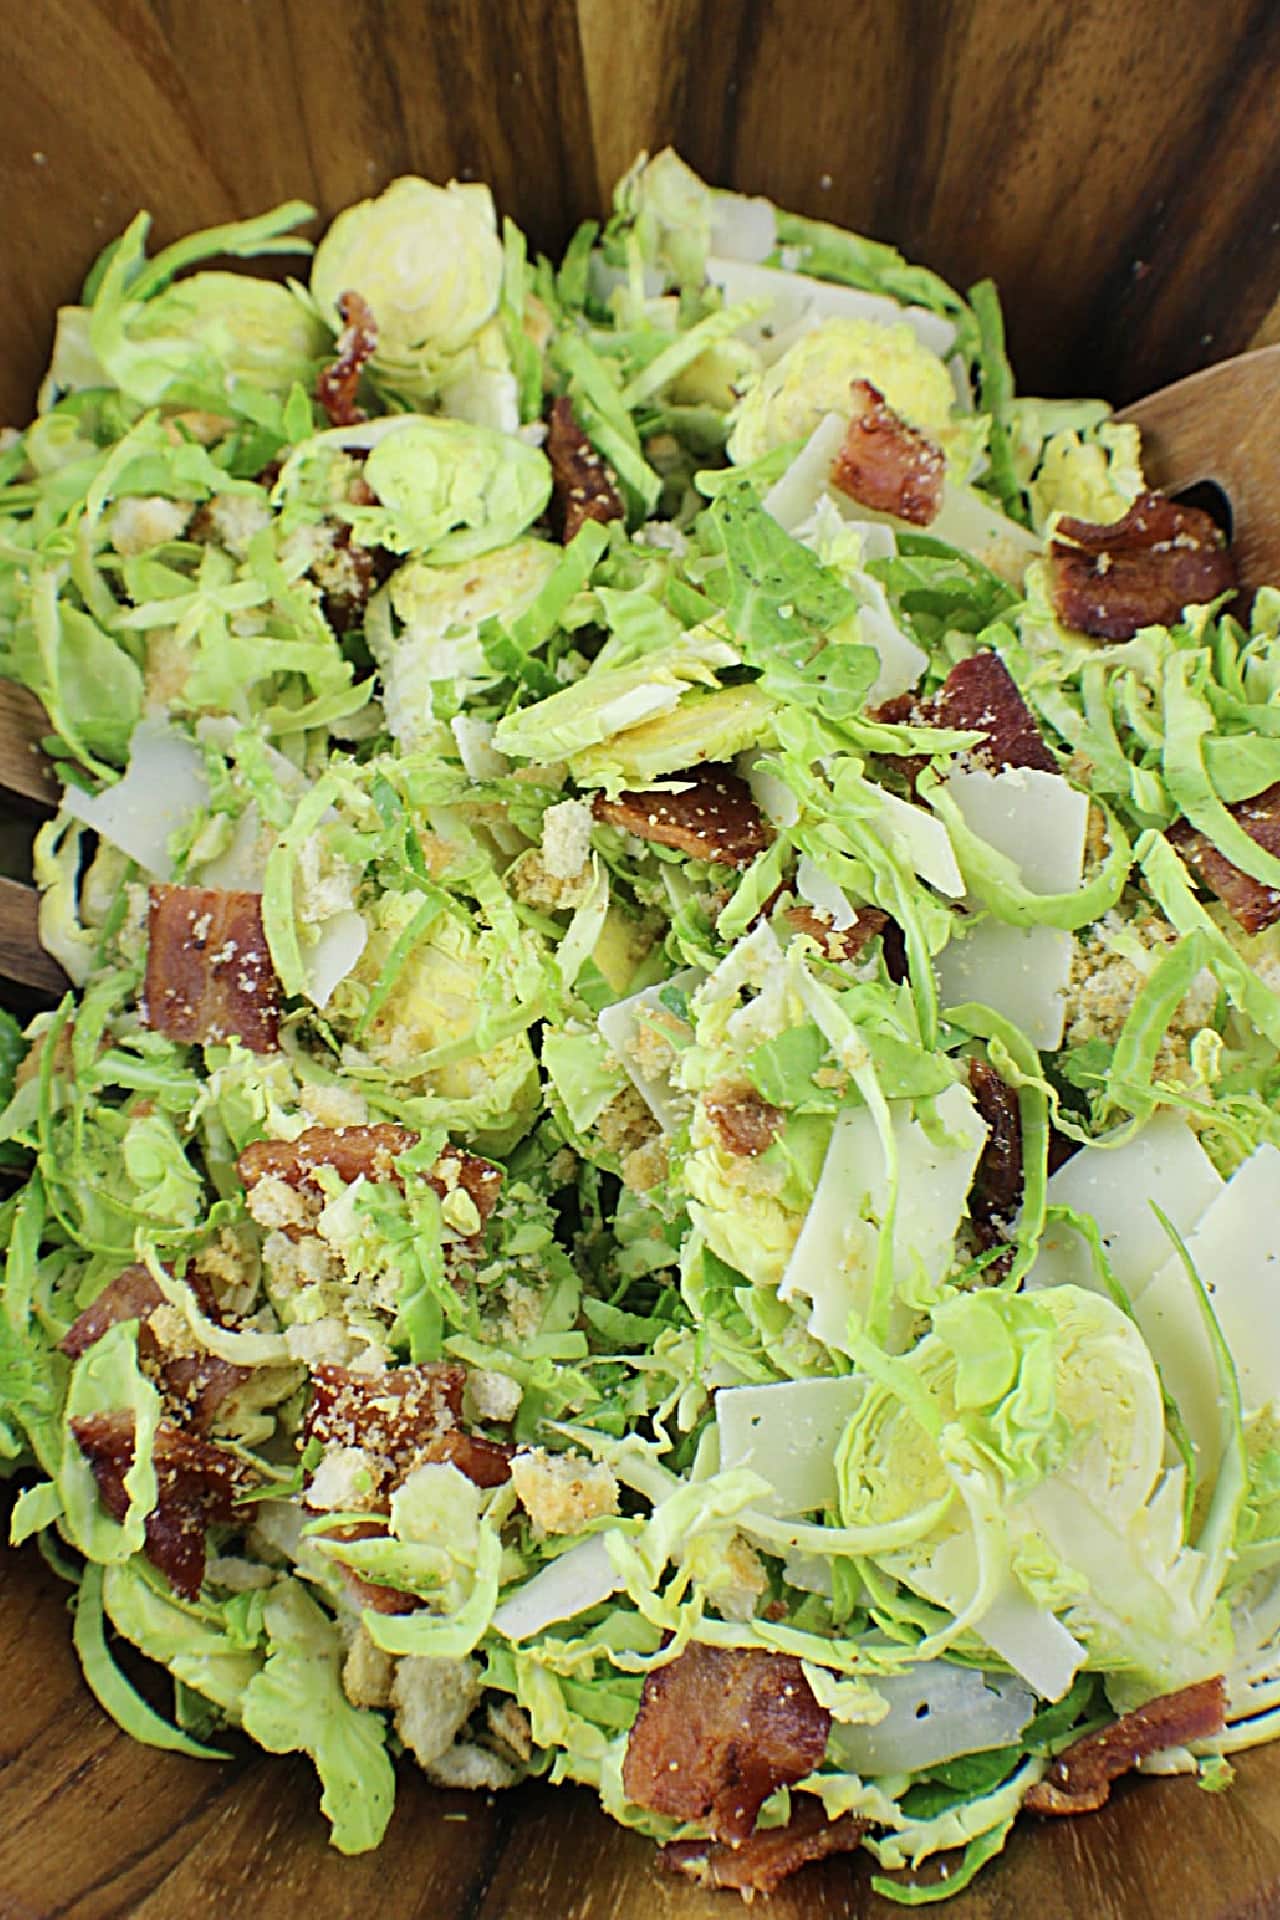 Brussels Sprouts Caesar Salad ingredients mixed together in wooden salad bowl